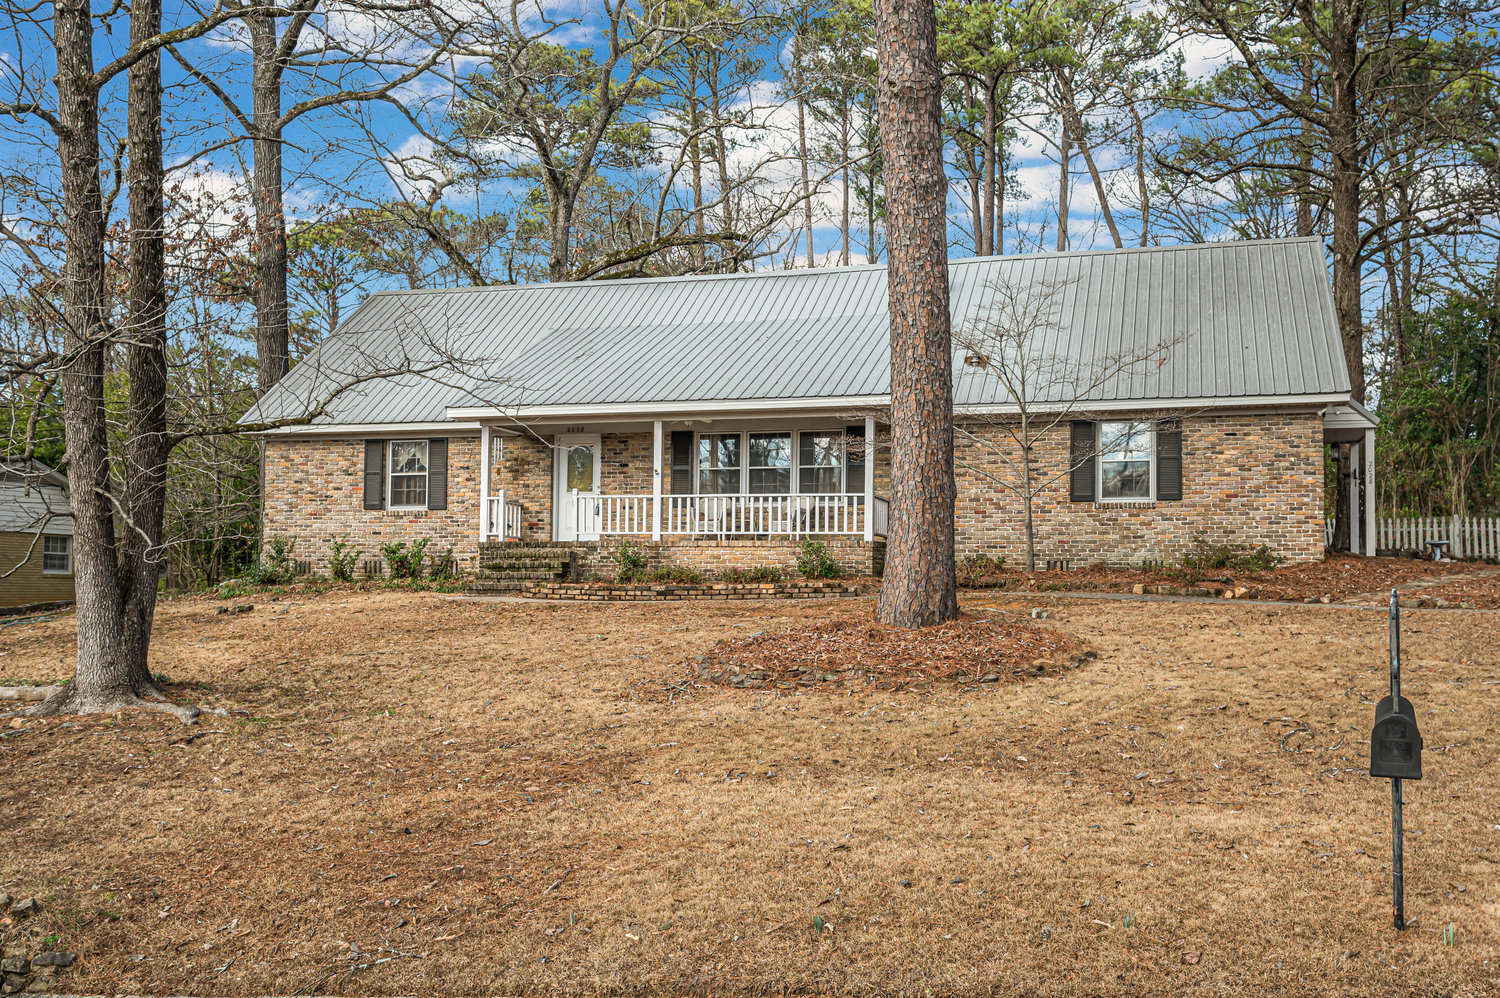 Virtual Tour of Birmingham Metro Real Estate Listing For Sale | 2028 Weeping Willow Lane, Hoover, AL 35216